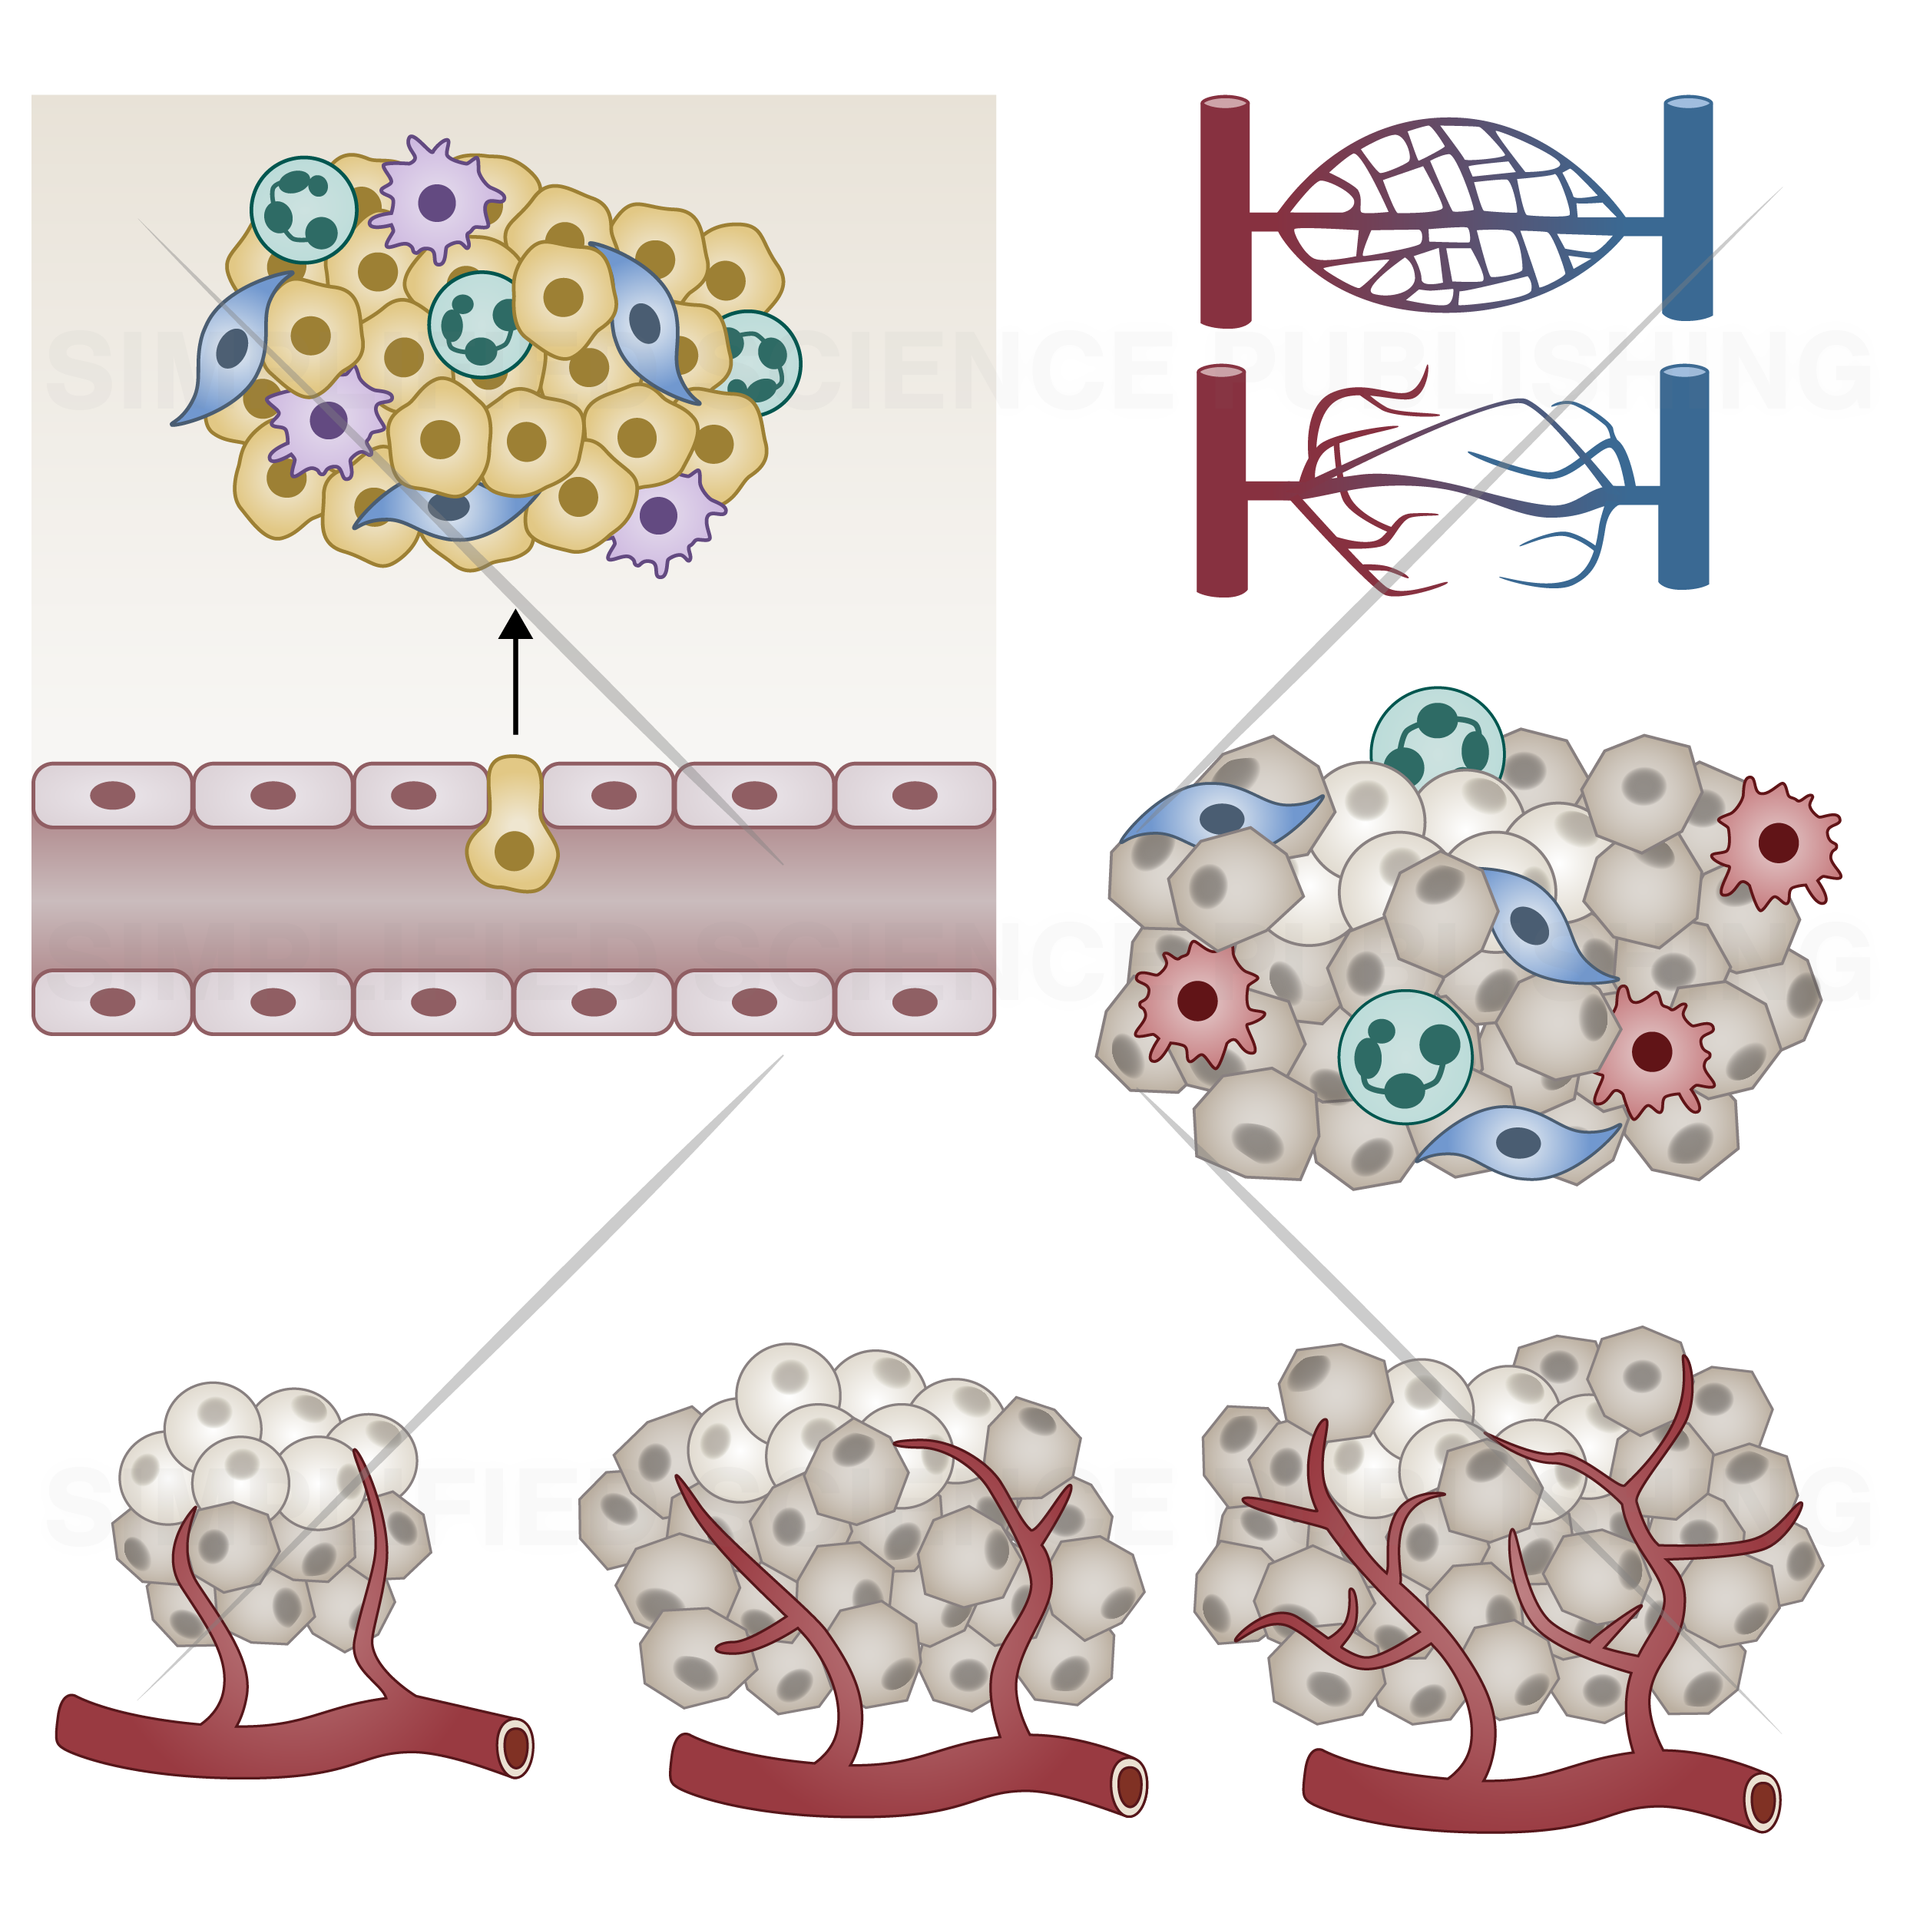 Cancer Cell Drawings and Templates